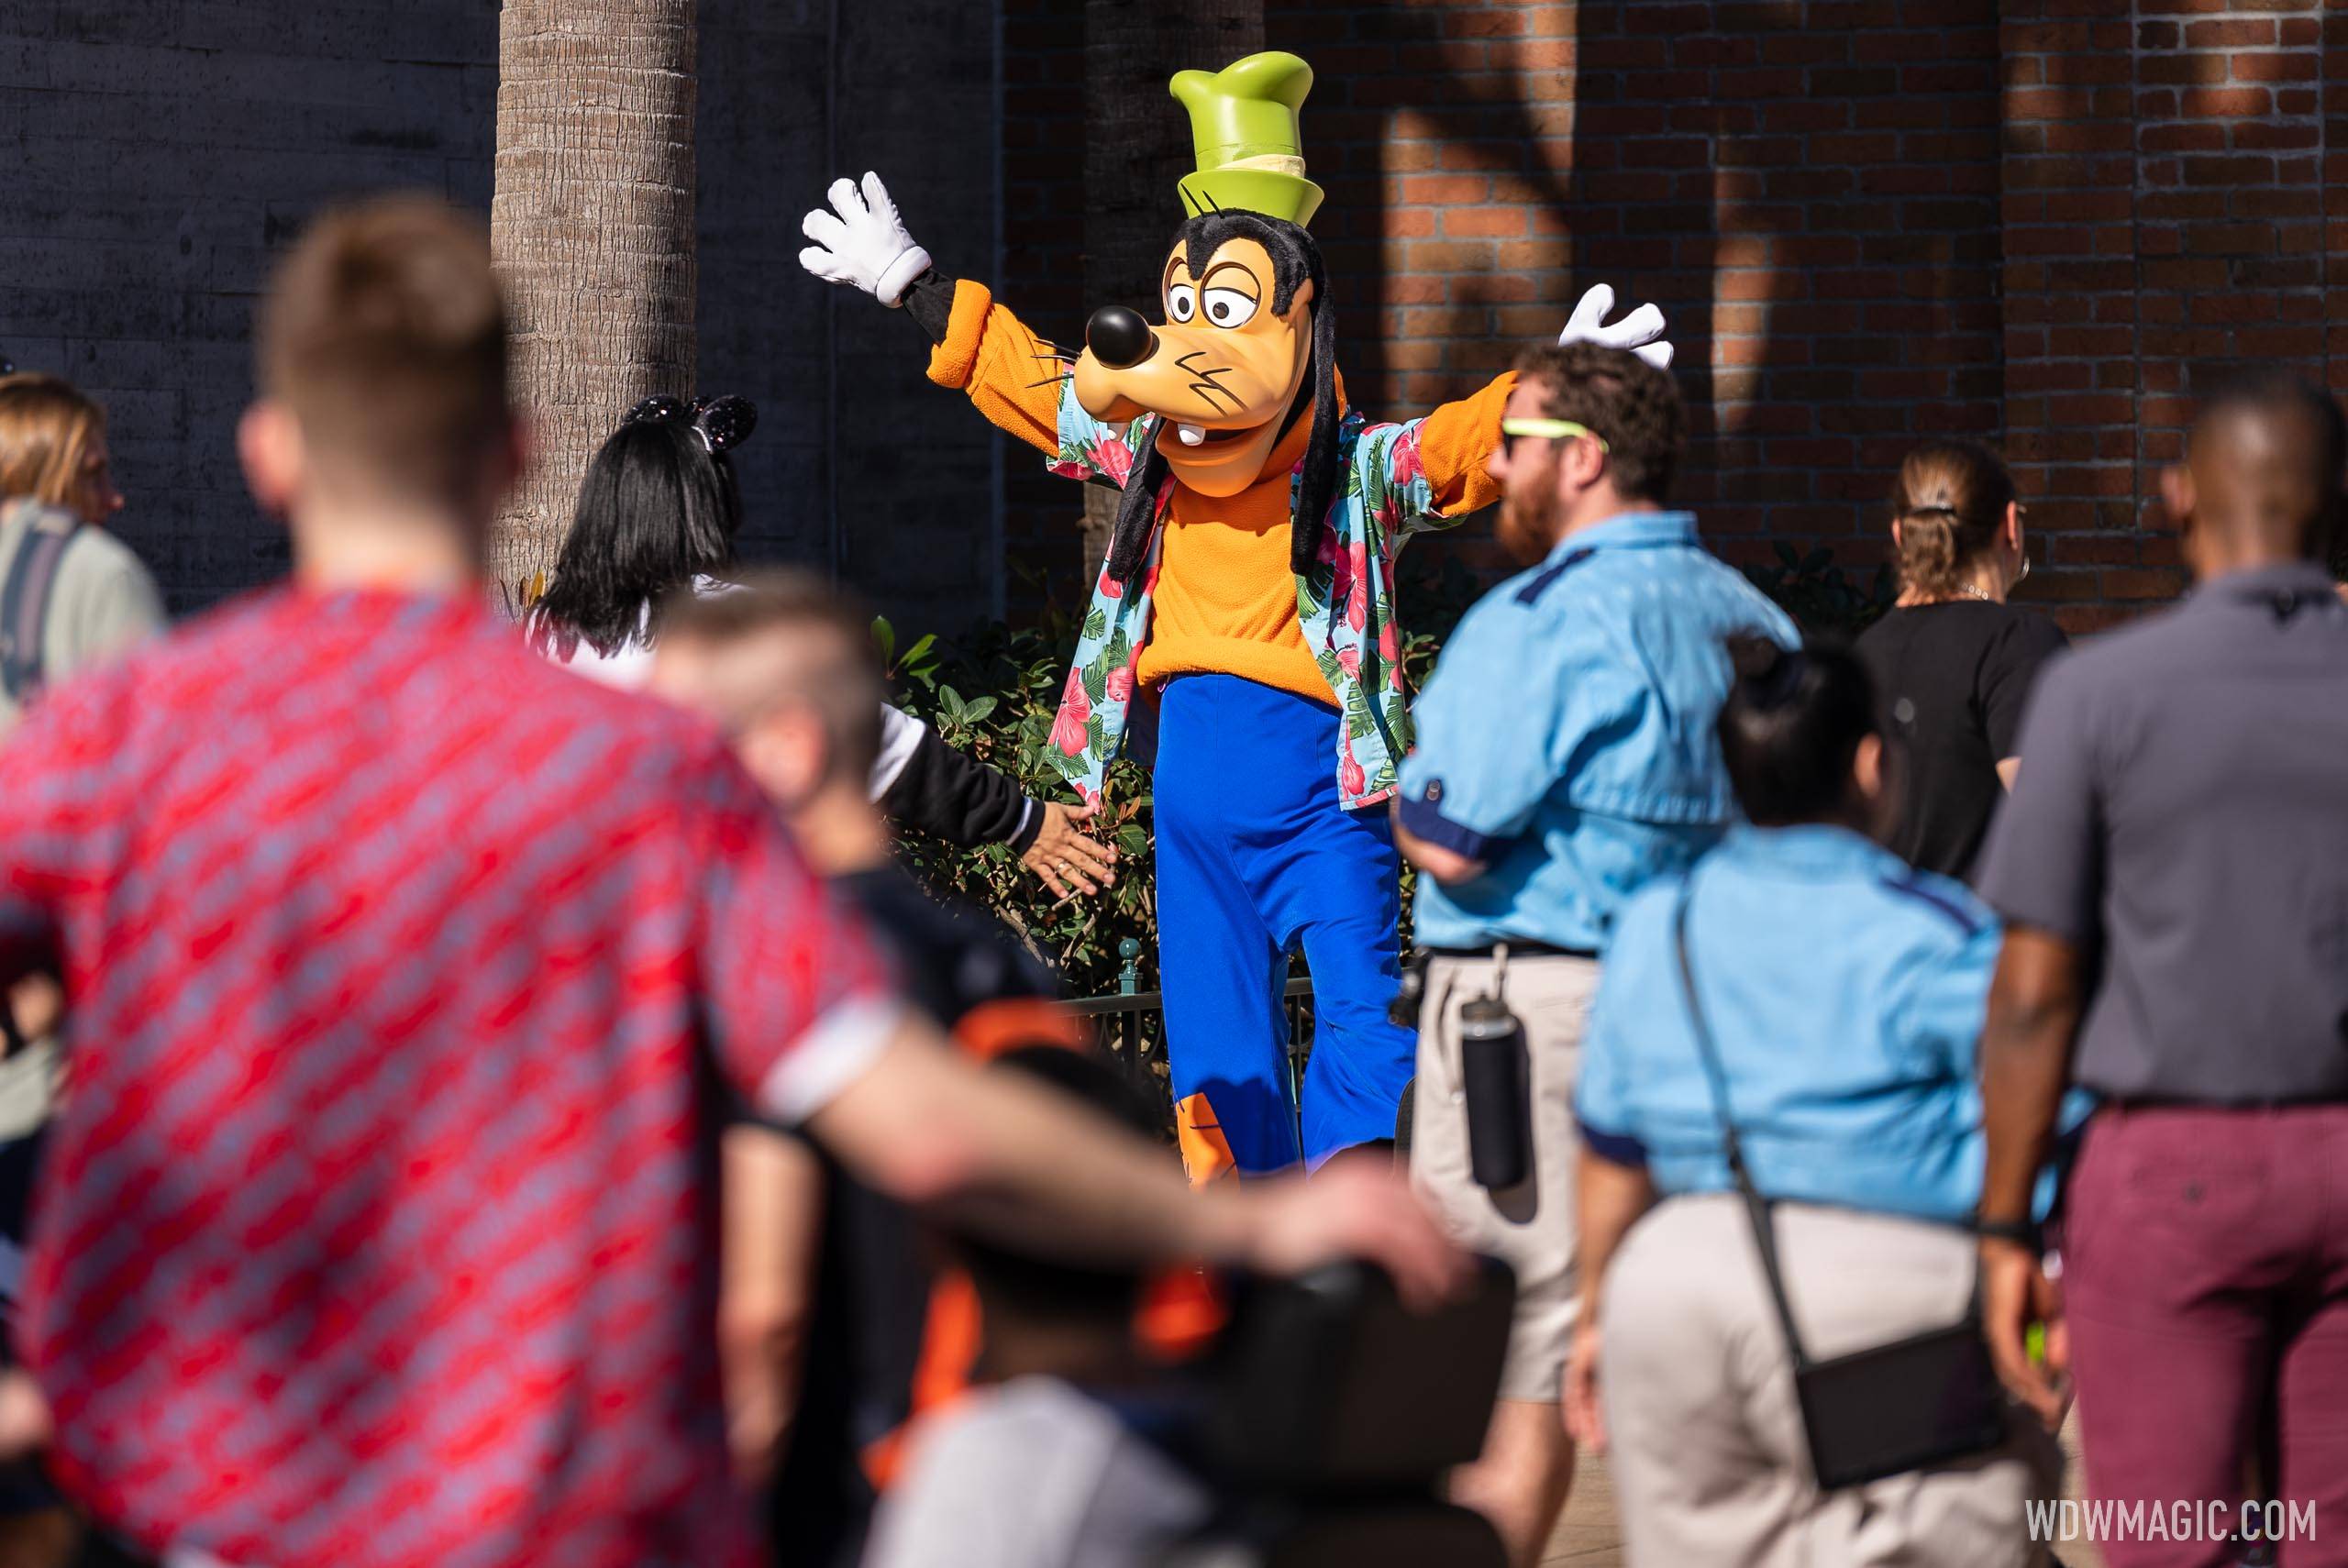 Goofy and Max meet and greet on Grand Avenue at Disney's Hollywood Studios